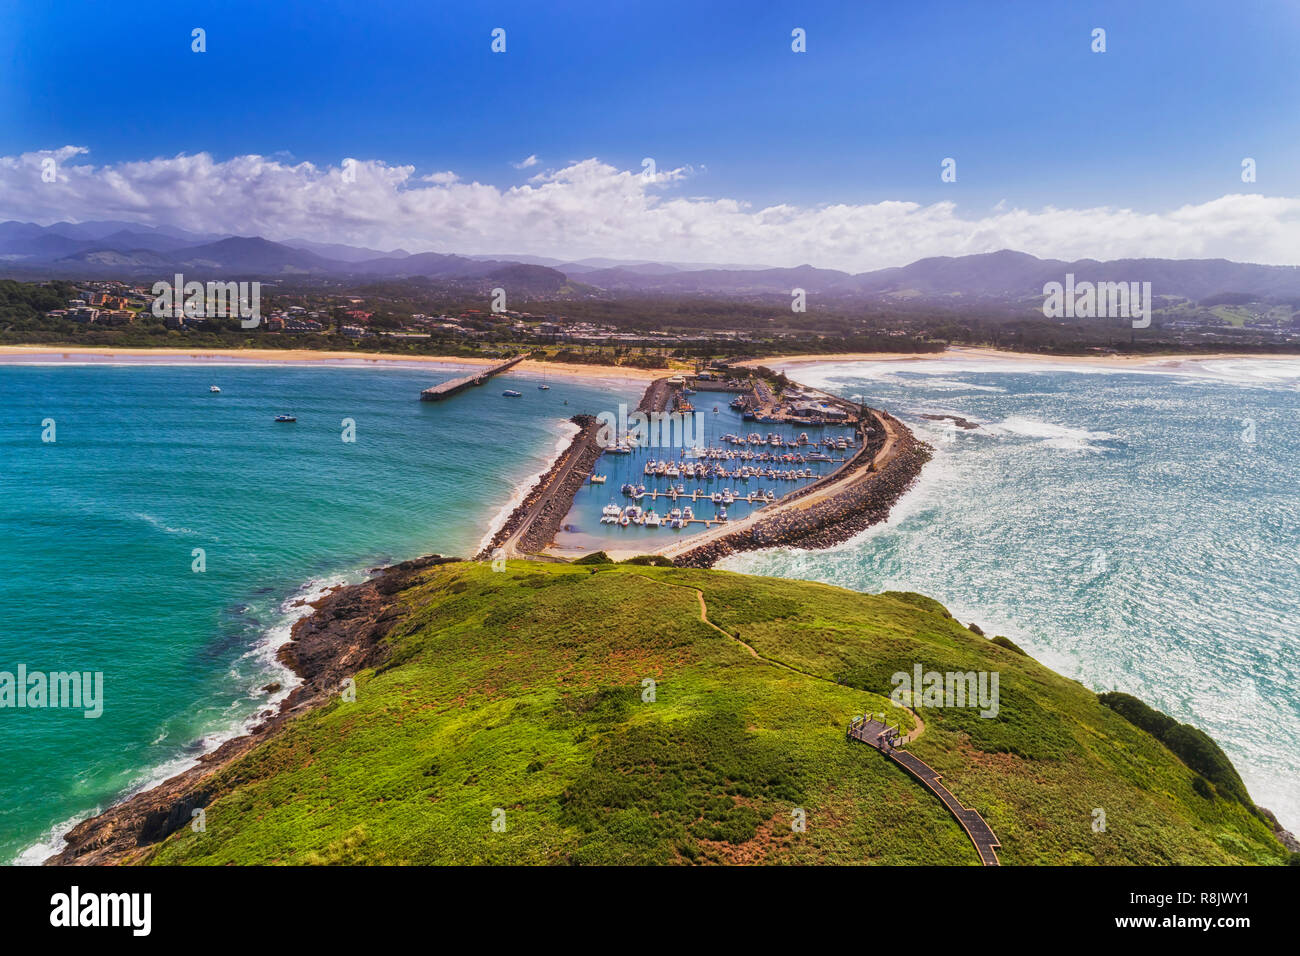 Coffs harbour town waterfront from Muttonbird island connected to shore by stone wave breaking wall protectin marina and local sandy beach. Stock Photo